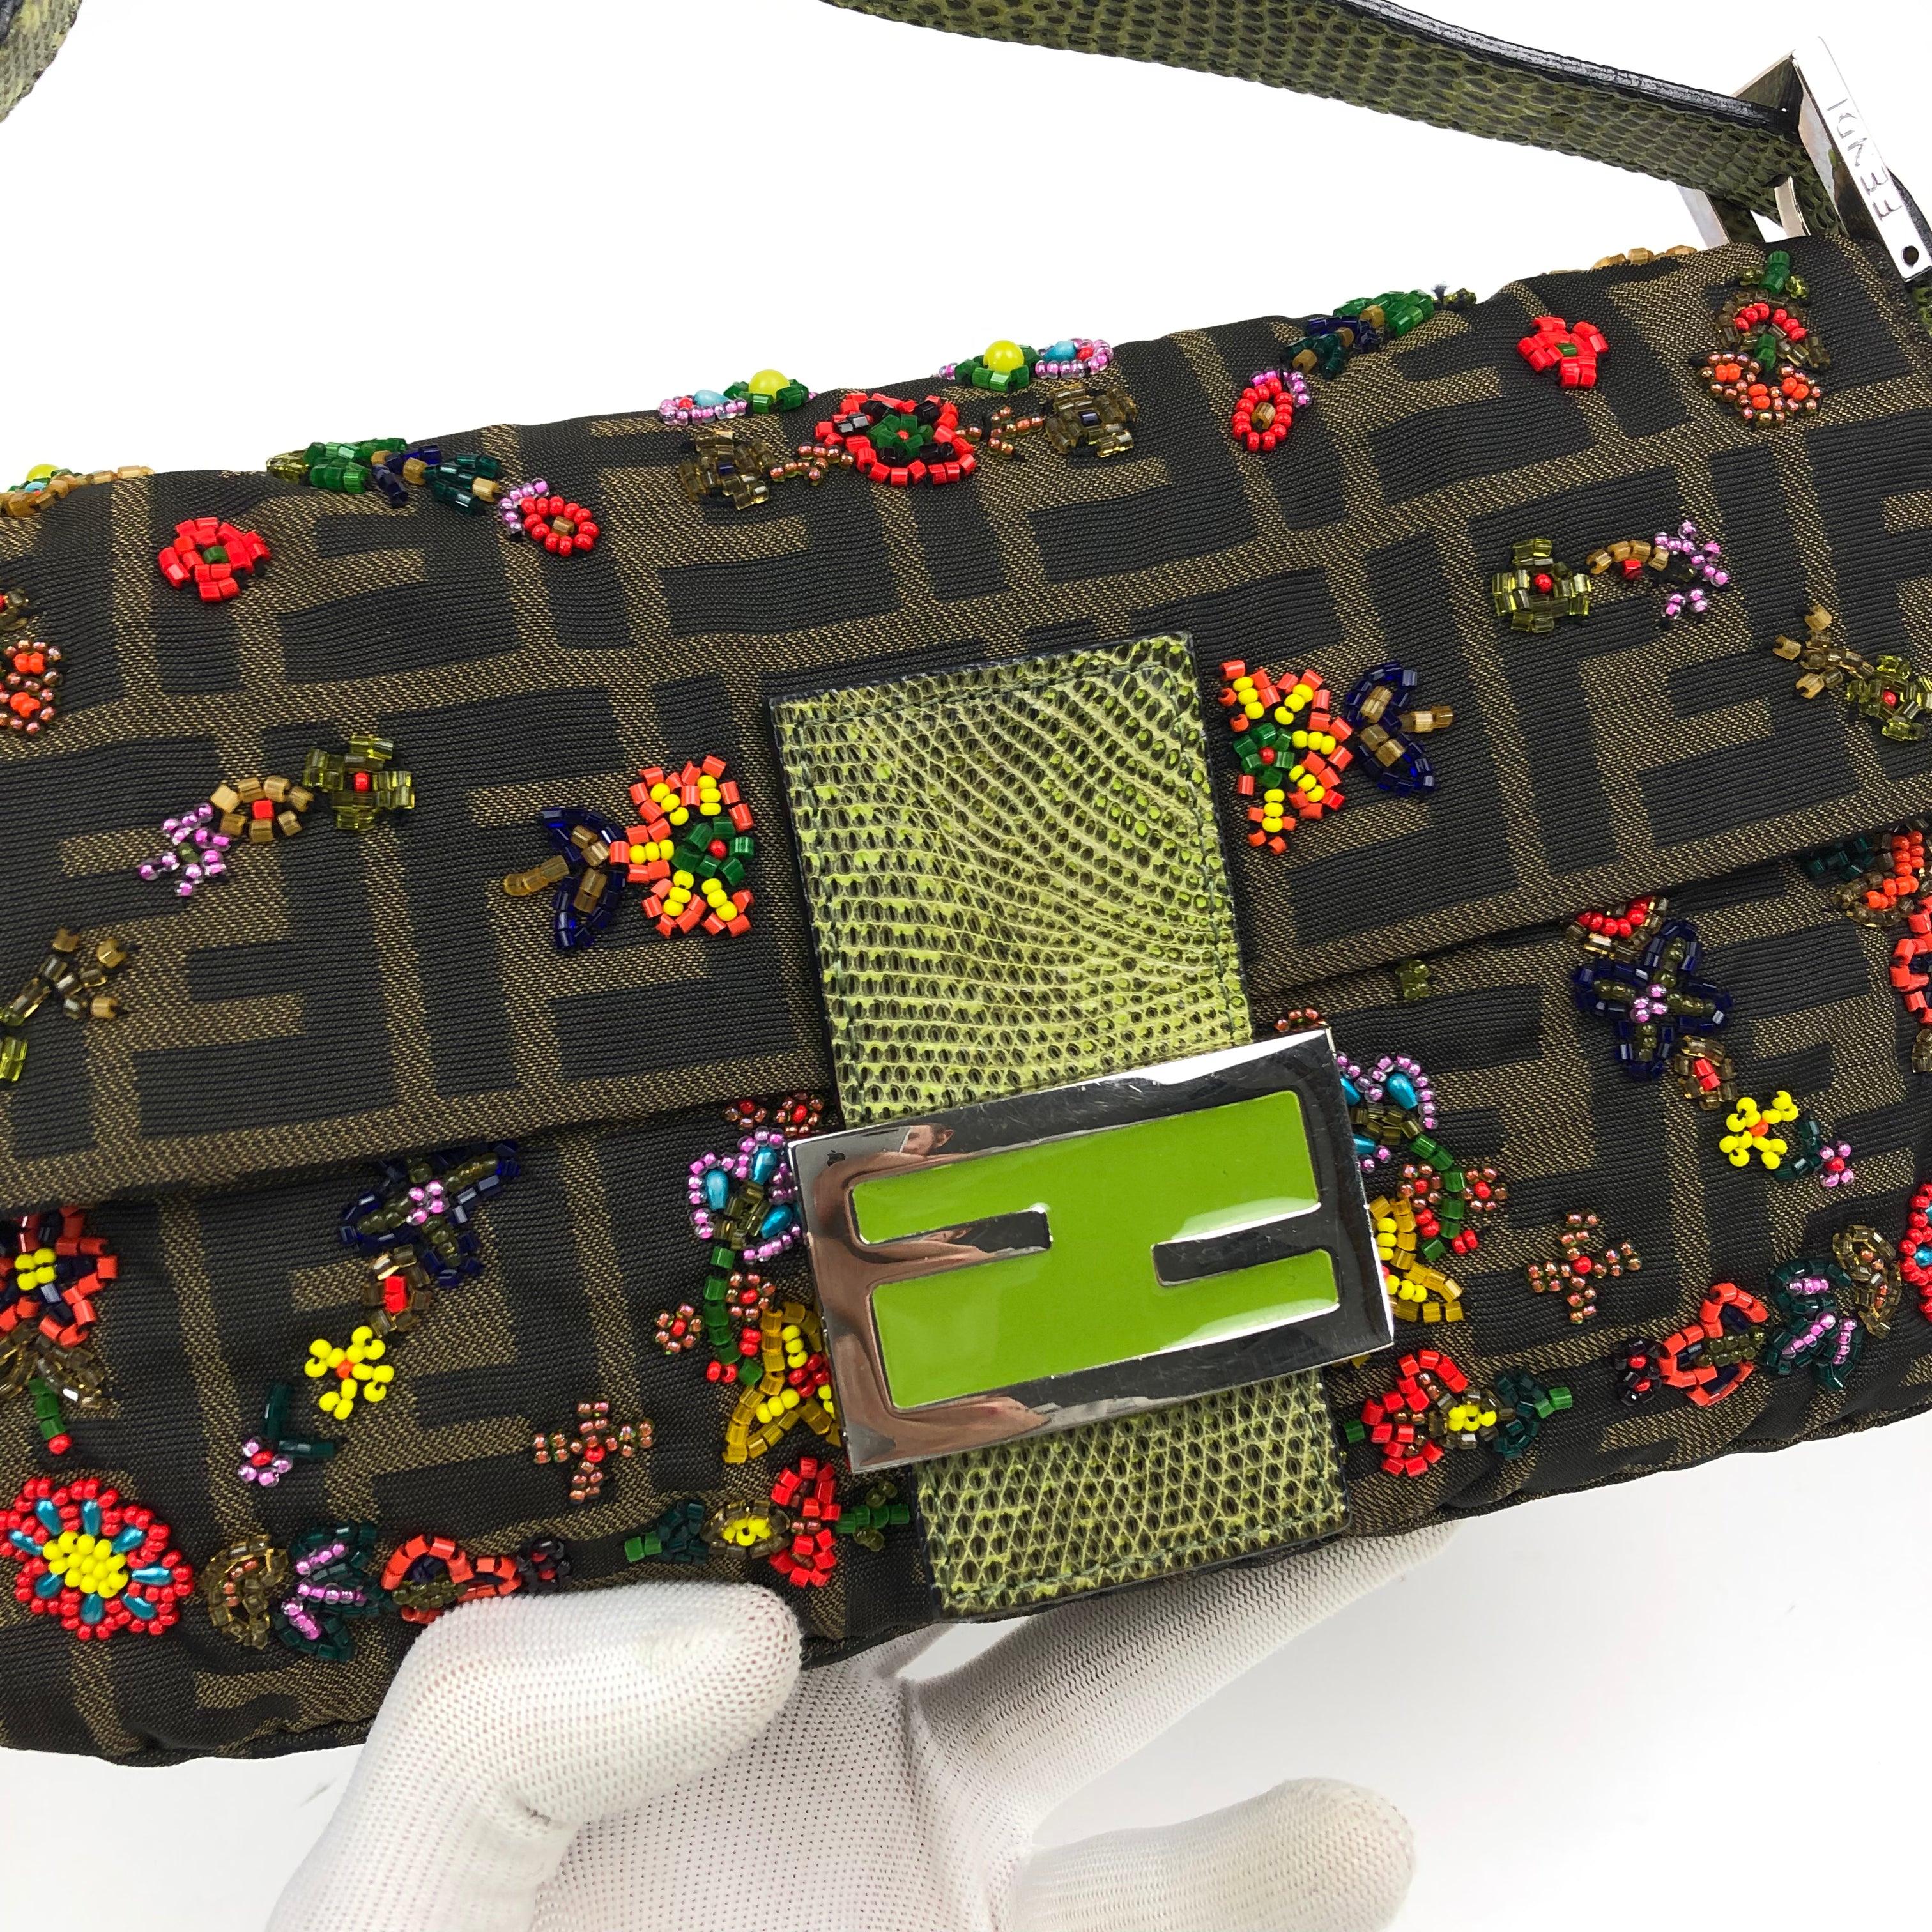 Fendi Zucca Floral Beaded Baguette Bag with Exotic Lizard Detailing